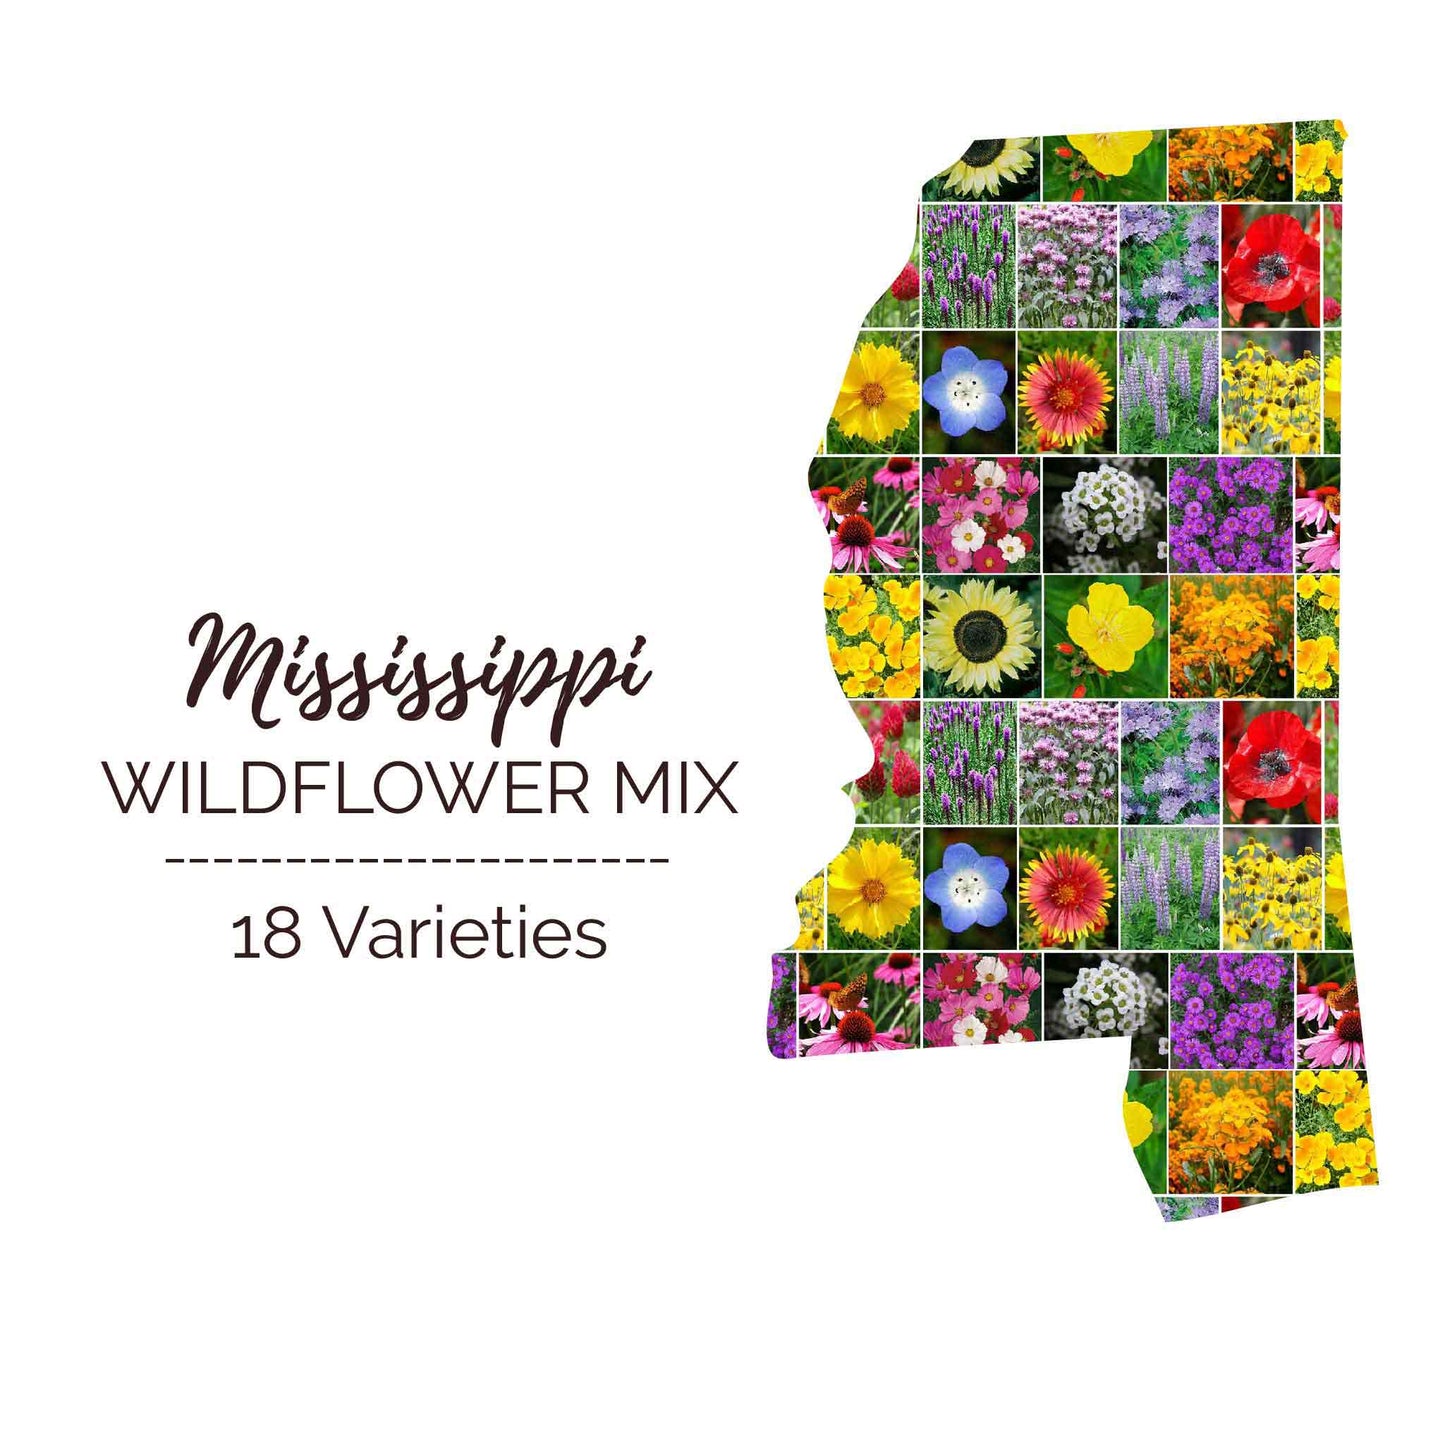 mississippi wildflower seed mix